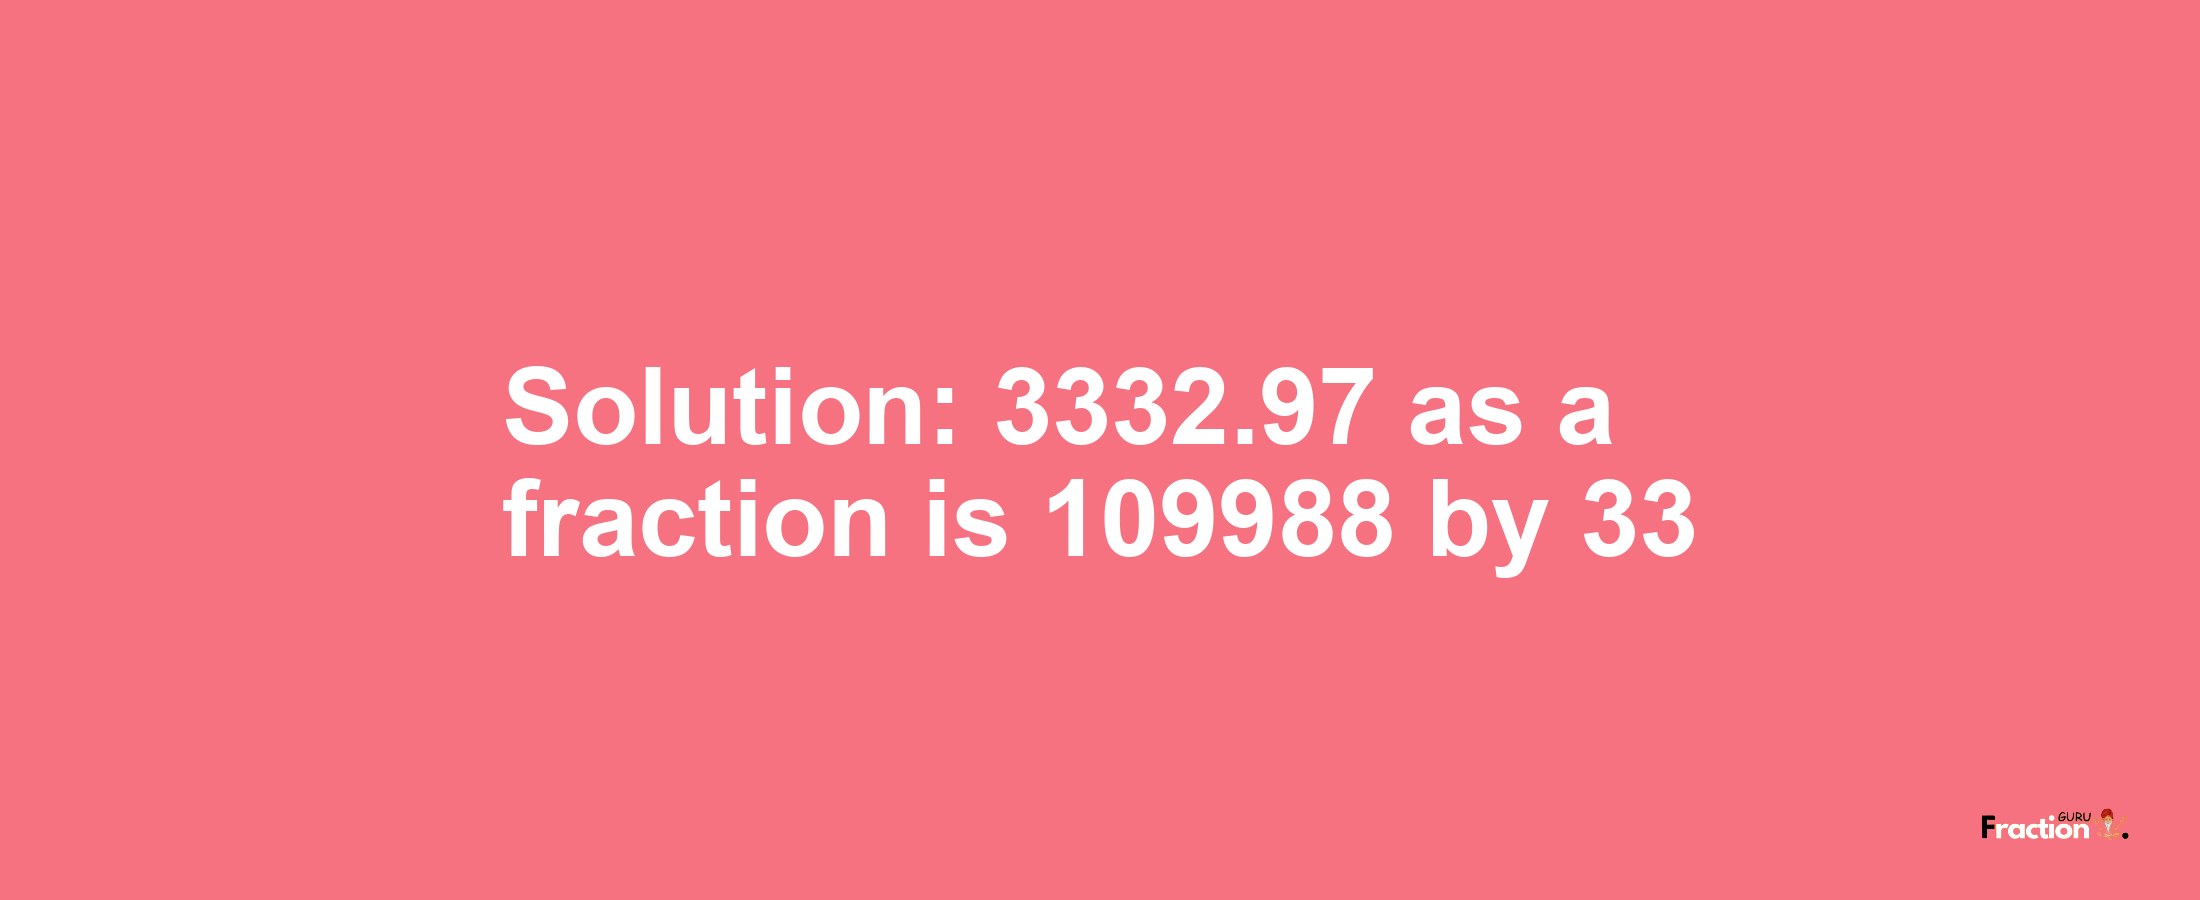 Solution:3332.97 as a fraction is 109988/33